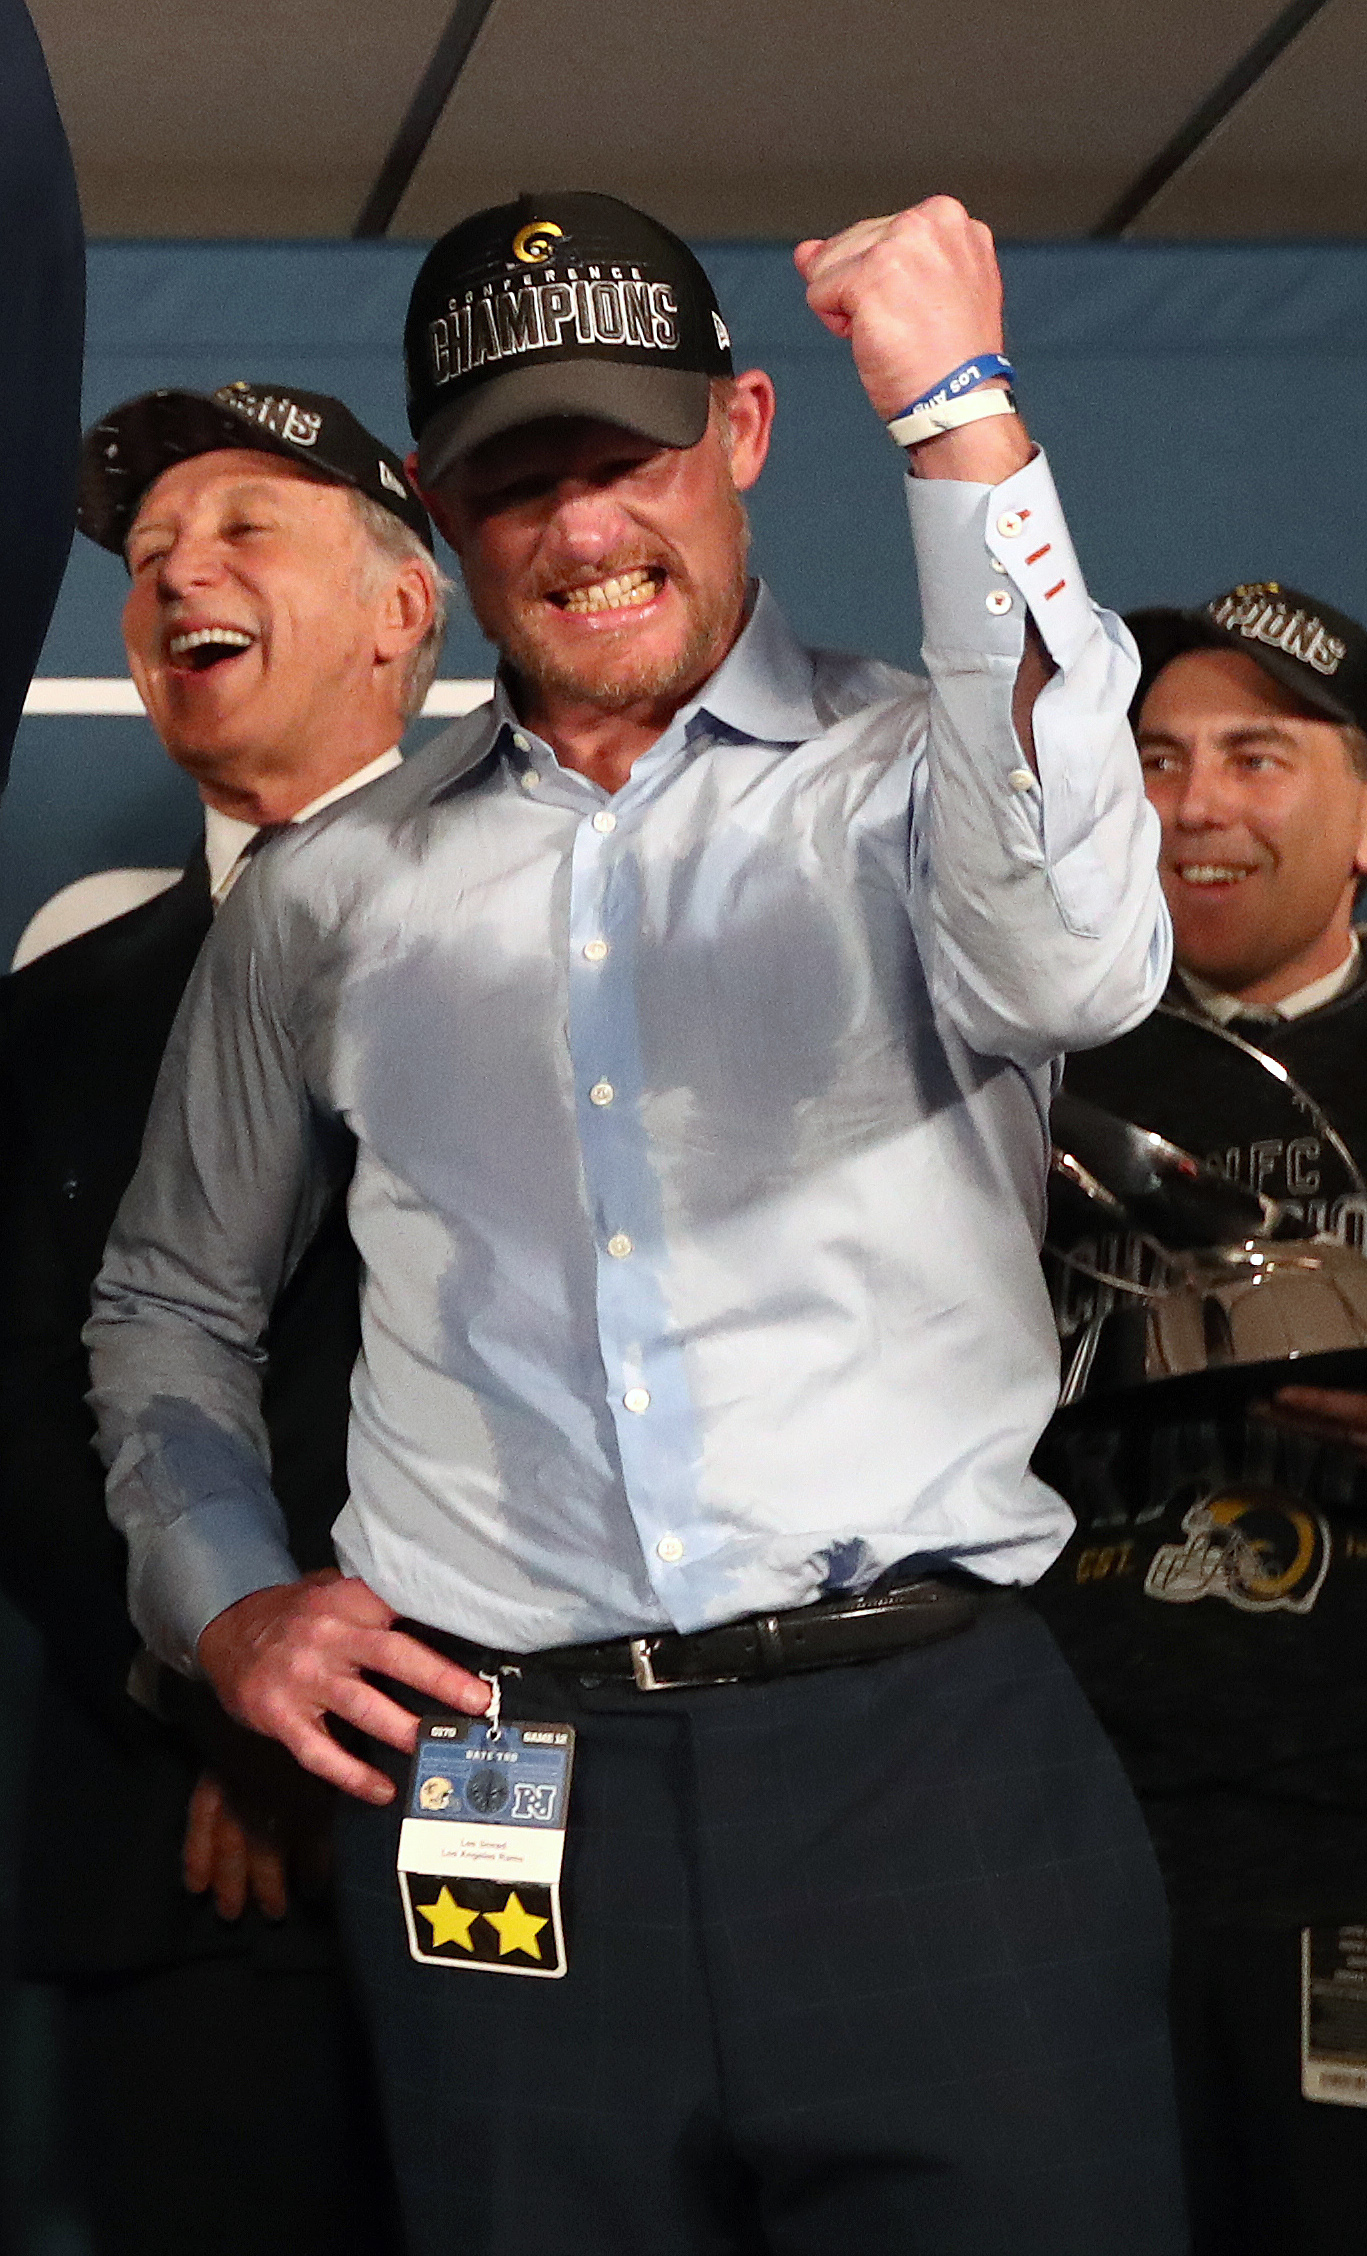 Los Angeles Rams General Manager Les Snead celebrates in the locker room after the Rams’ victory in the NFC Championship, Jan. 20, 2019.